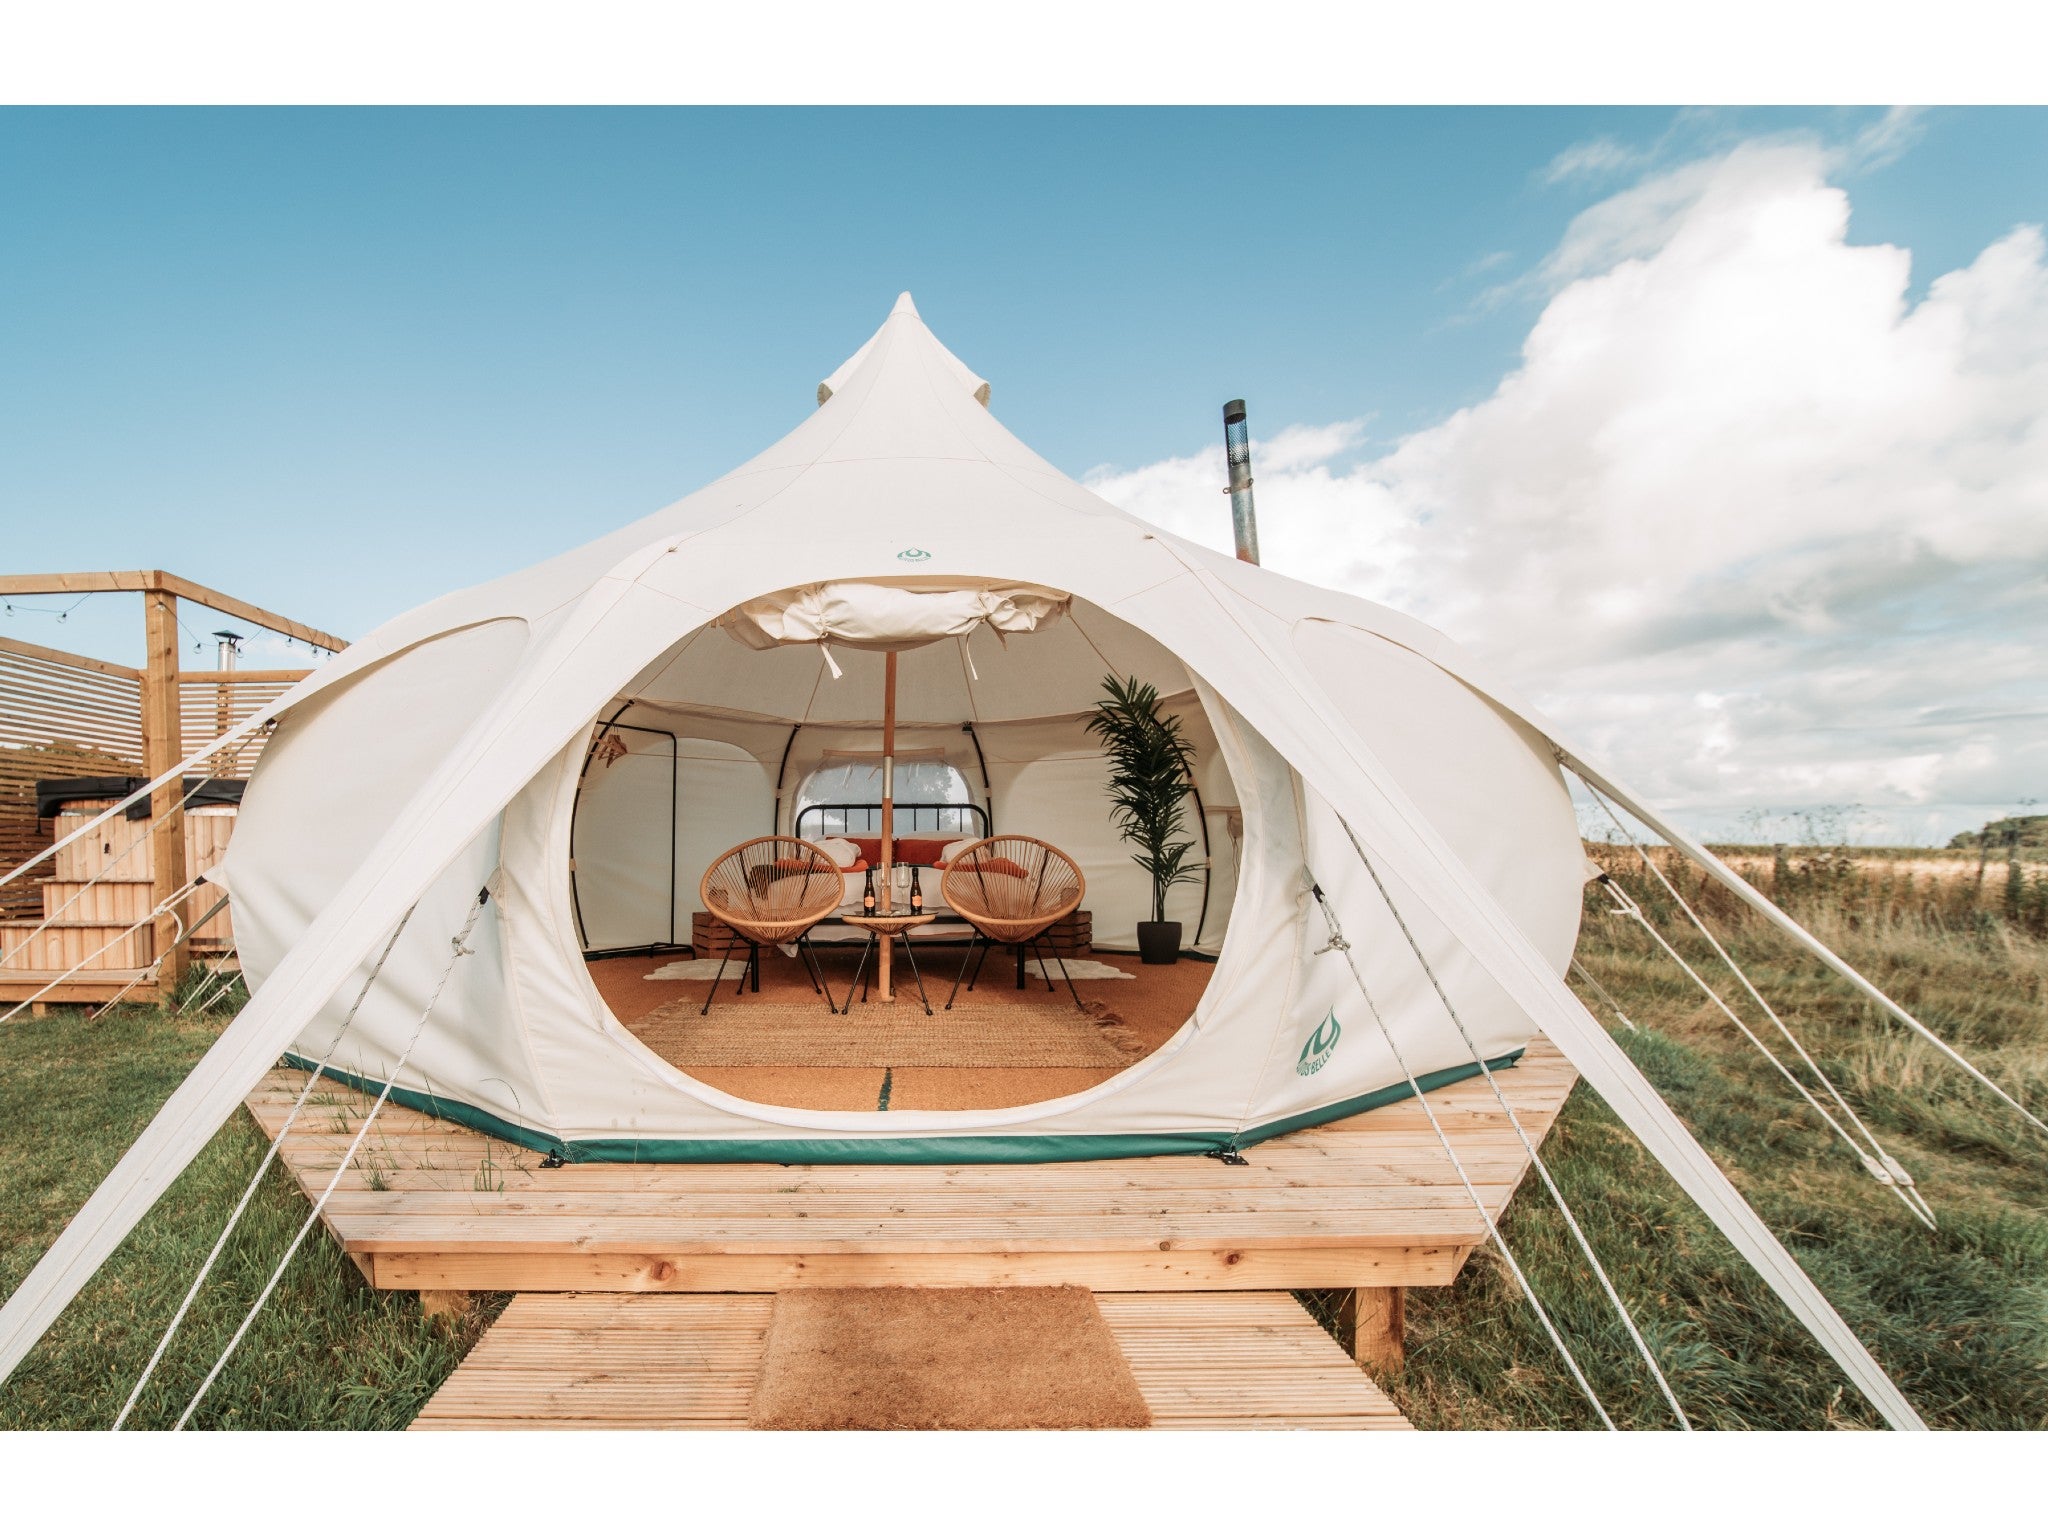 This adults-only glamping set has a deluxe hot tub option